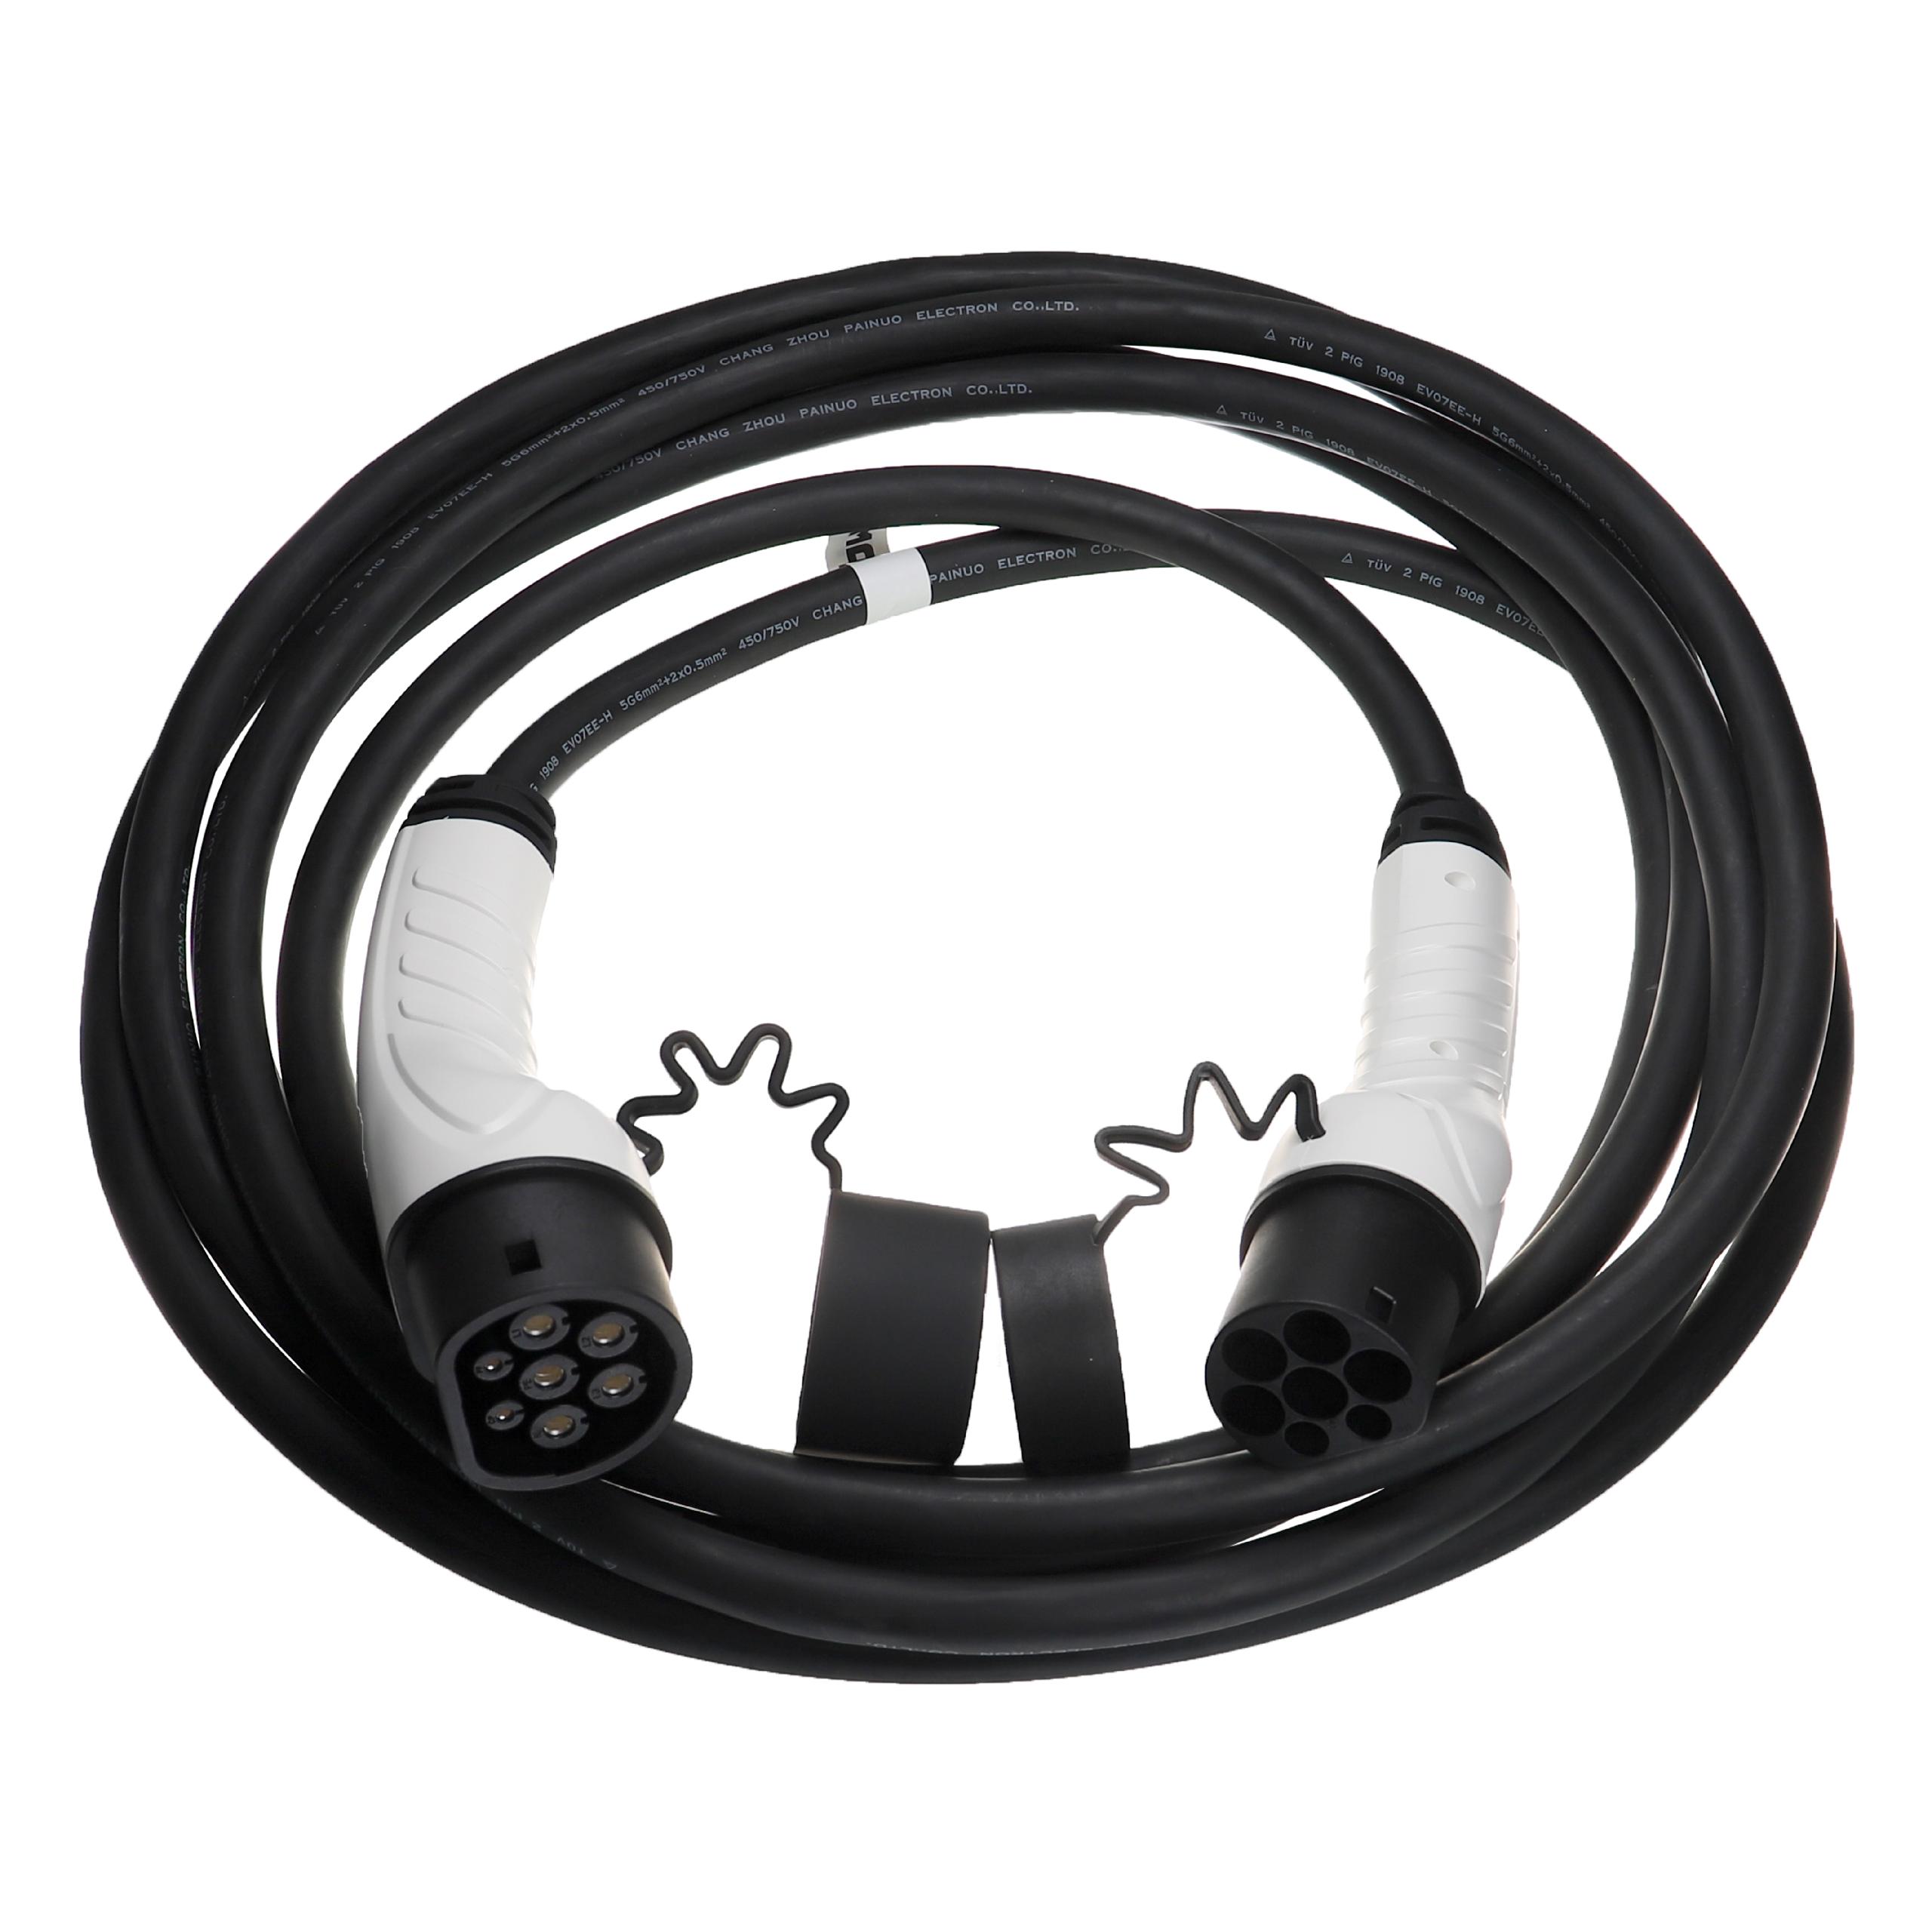 Charging Cable for Electric Car, Plug-In Hybrid - Type 2 to Type 2 Cable, 3-phase, 32 A, 22 kW, 7 m